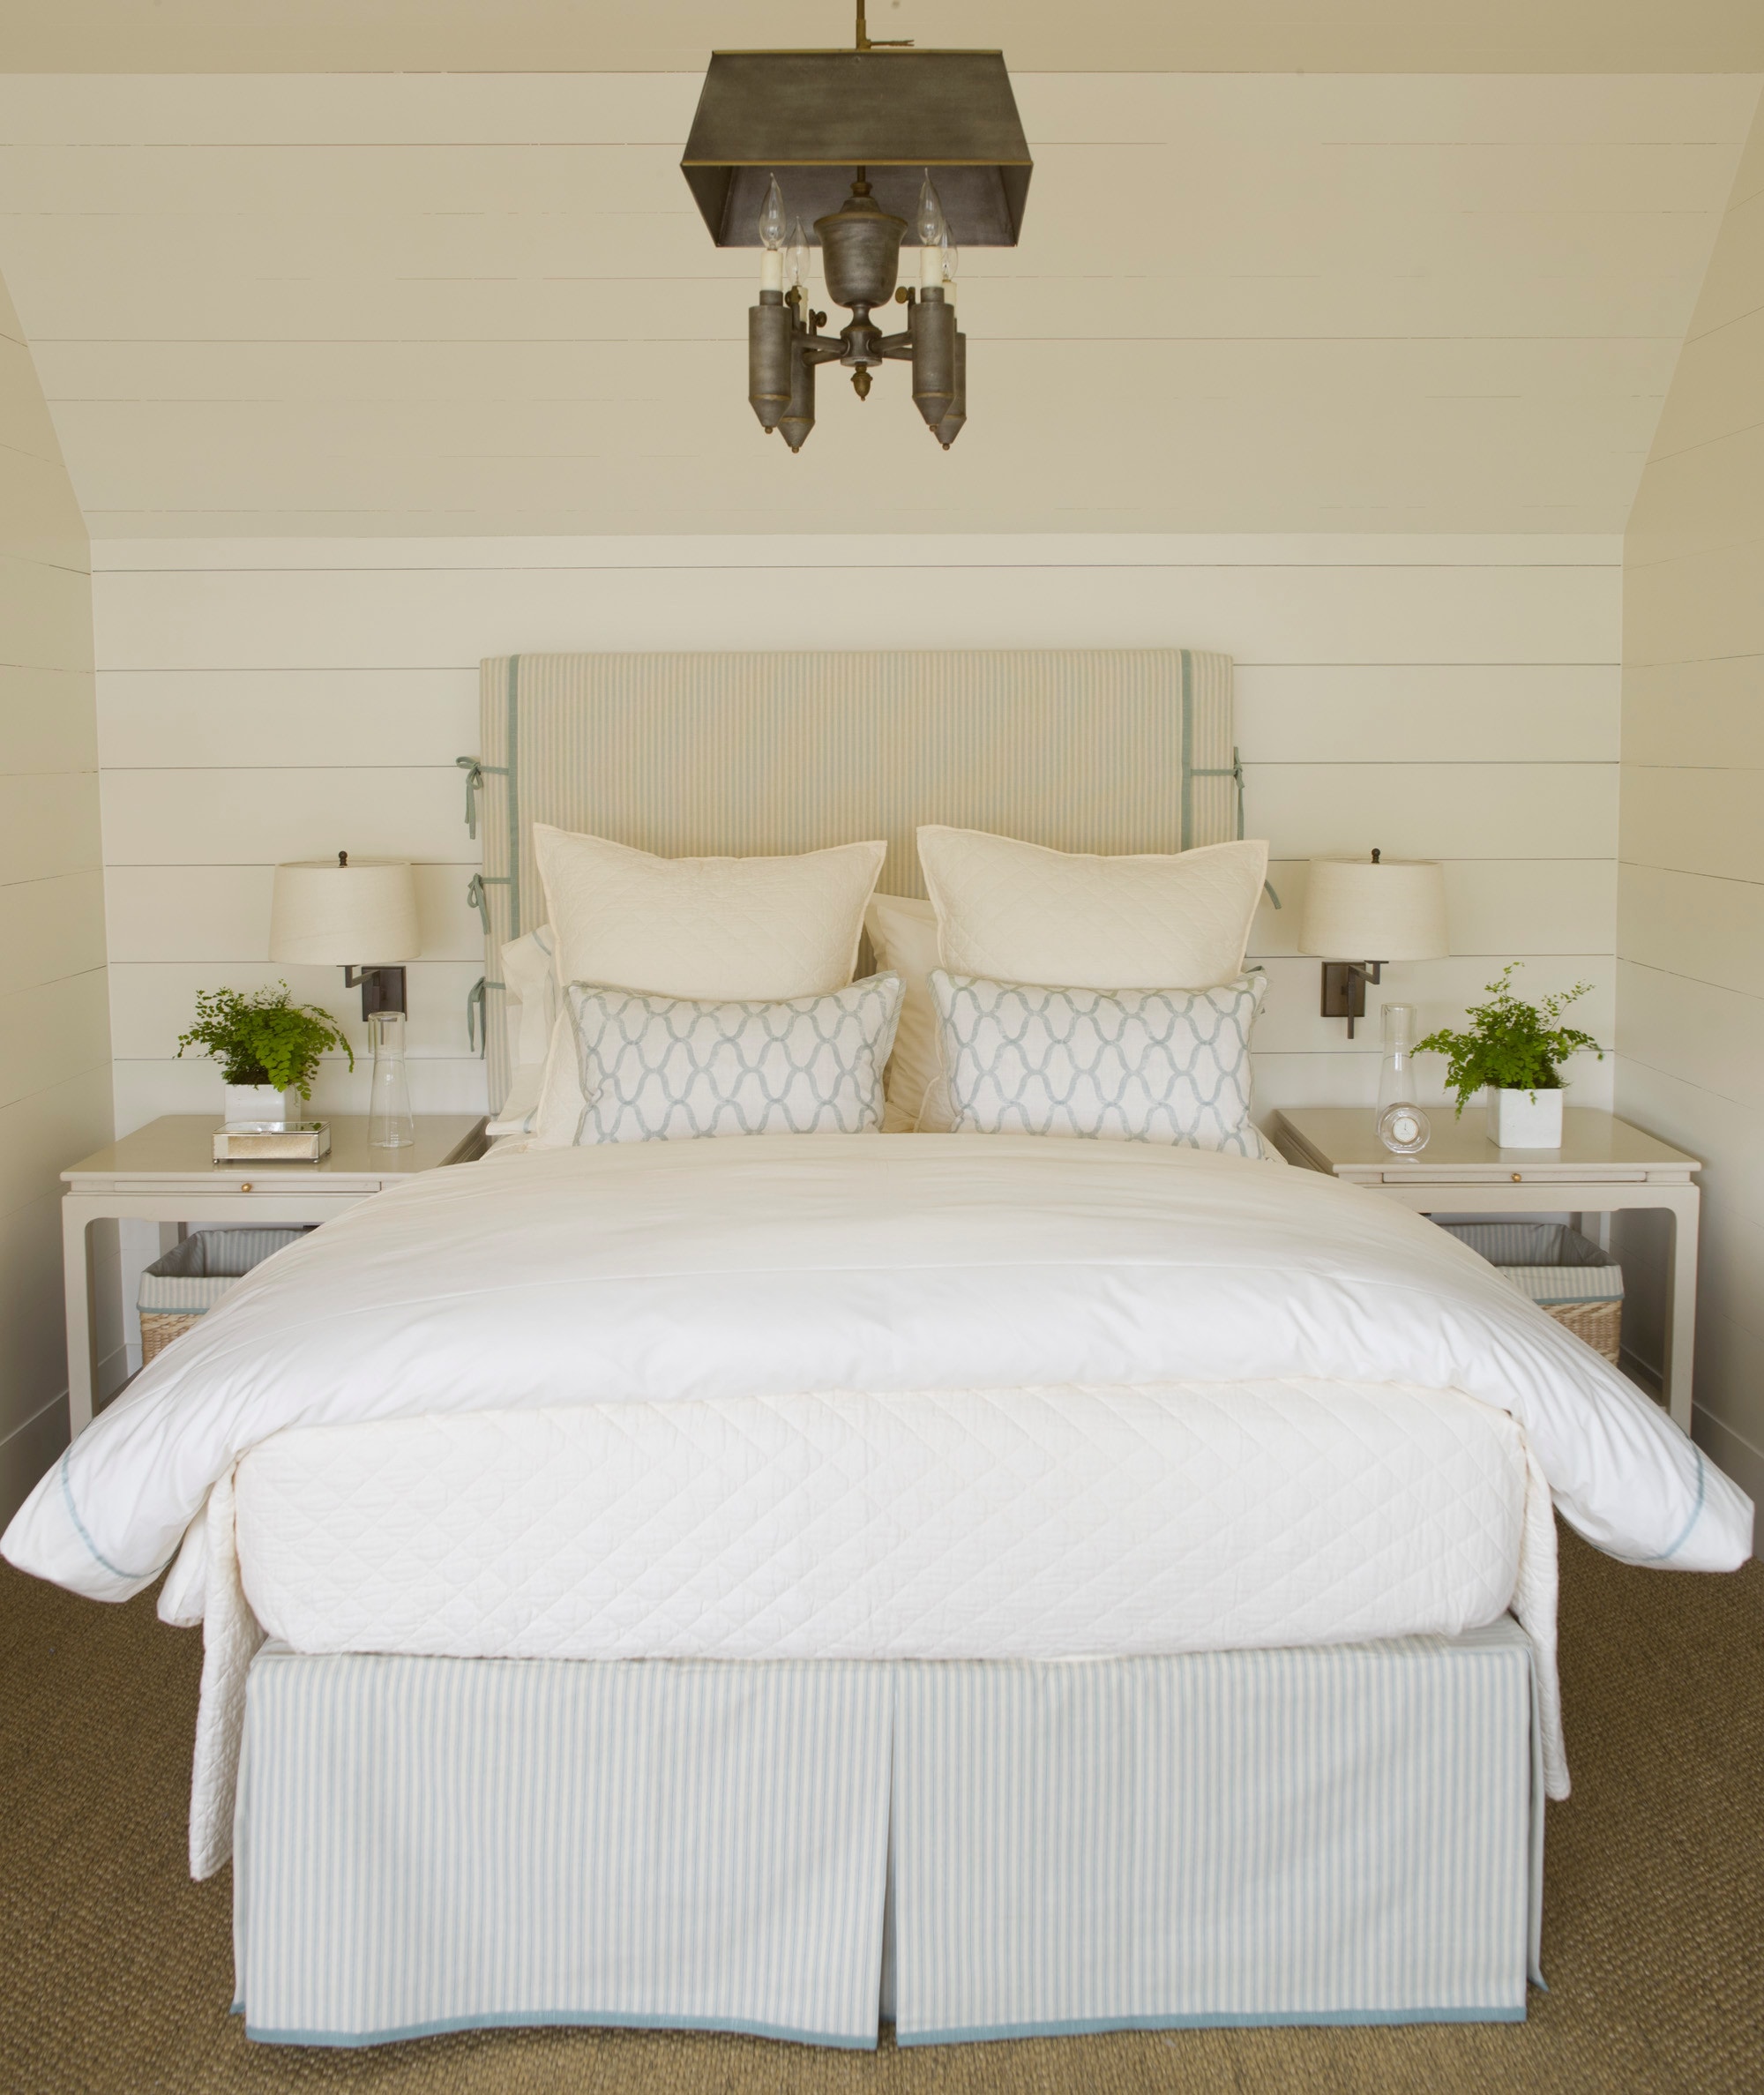 Guest Bedroom in traditional sophistication style featured in home tour